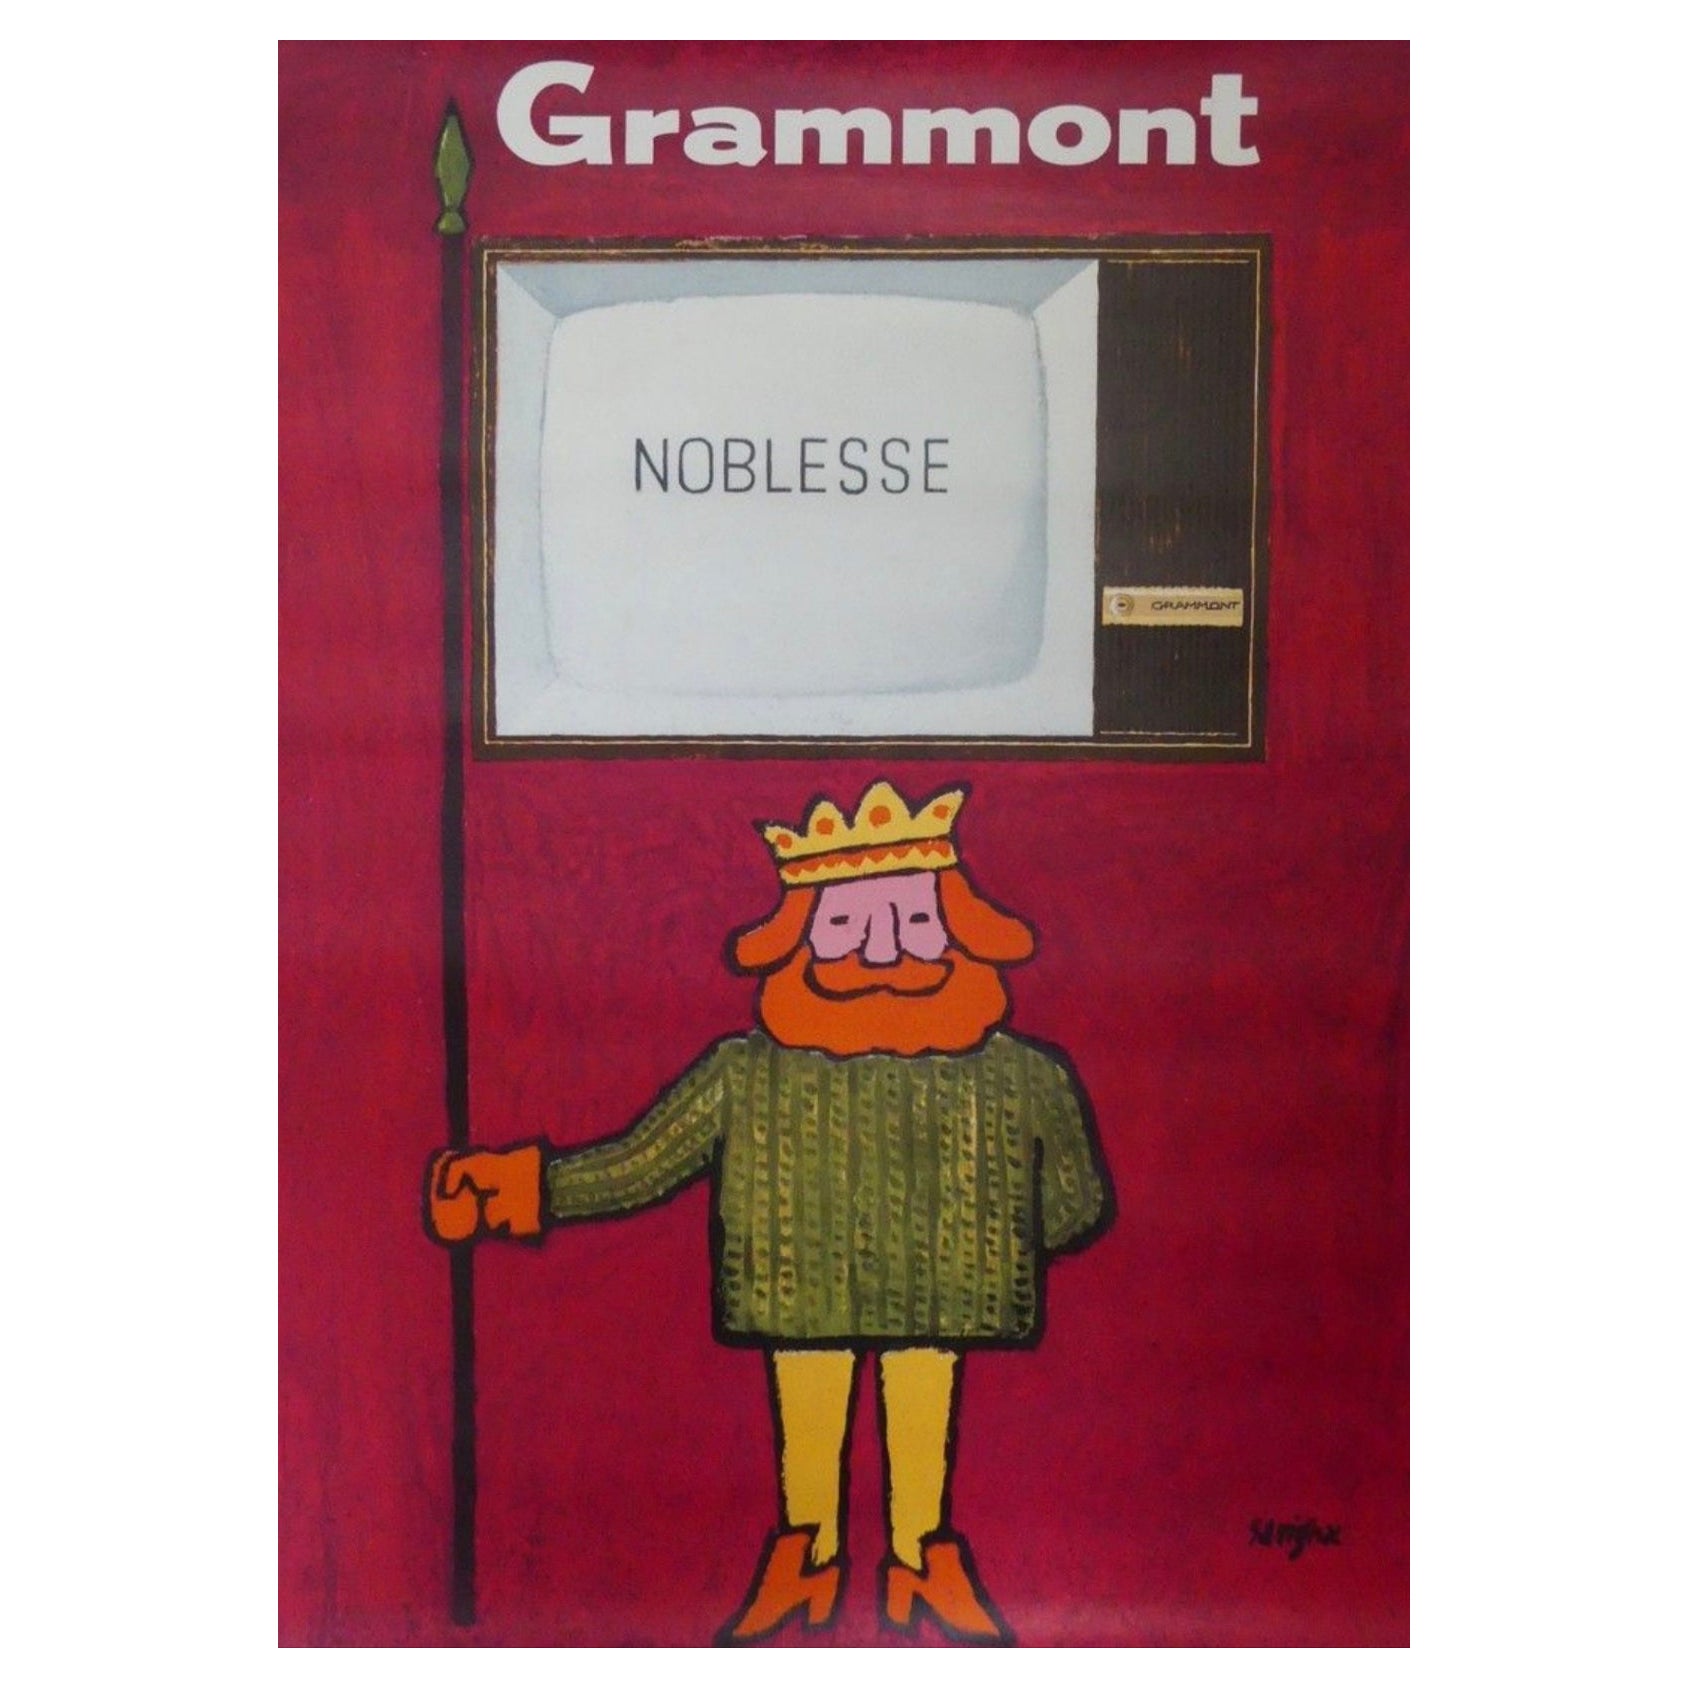 'Grammont Television' Original French Advertising Poster, 1970